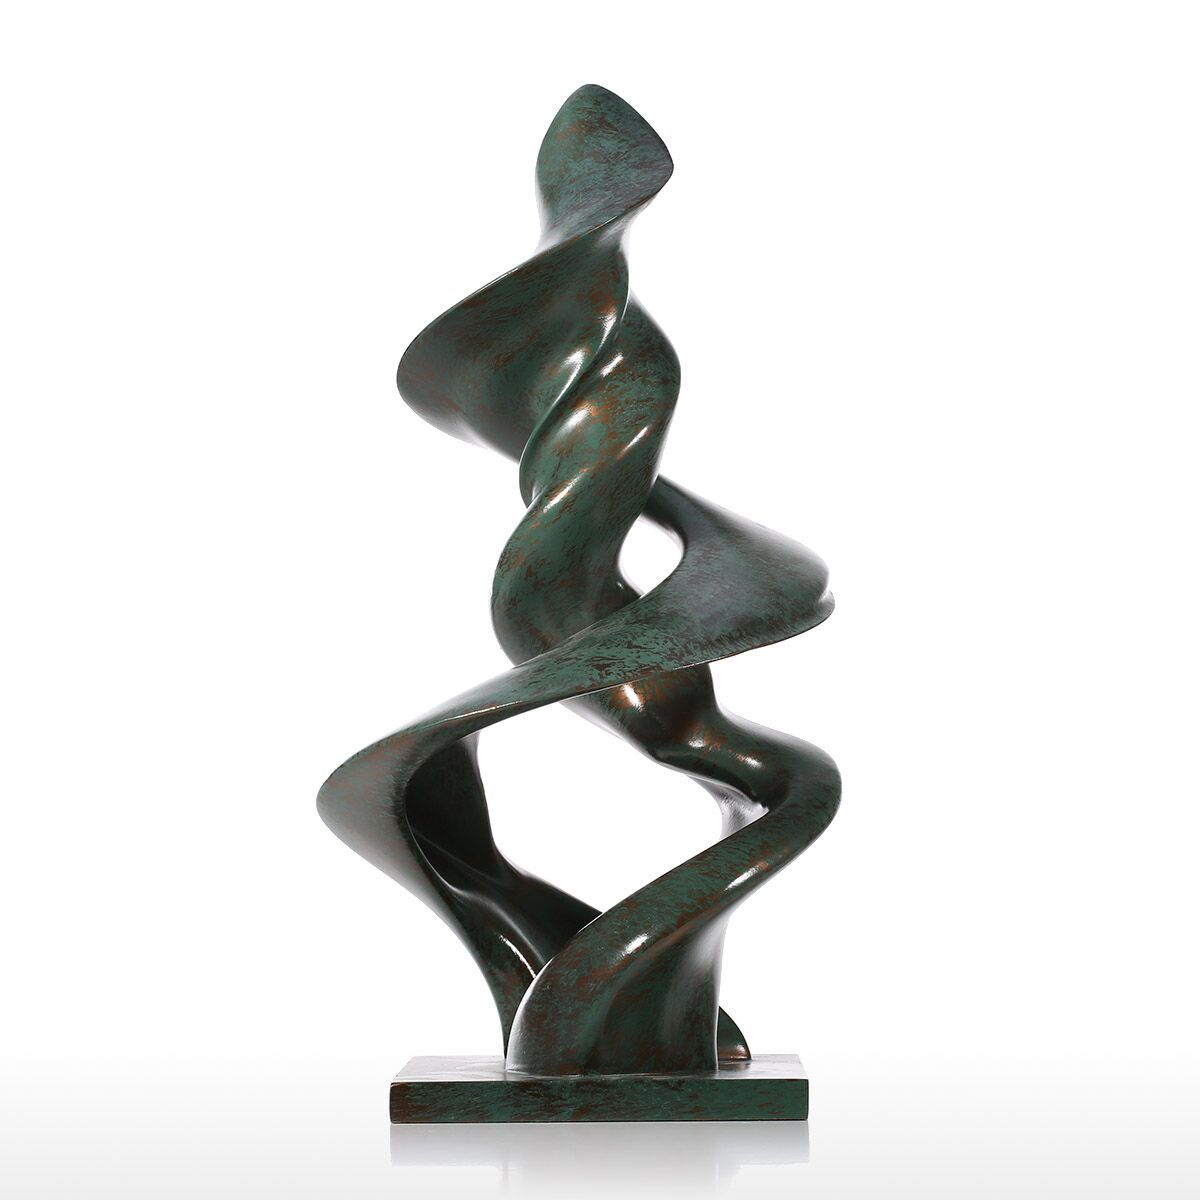 Ao76 Rotate Three-dimensional Abstract Resin Sculpture In Olive Green - 8.3 X 8.3 X 16.1 In.